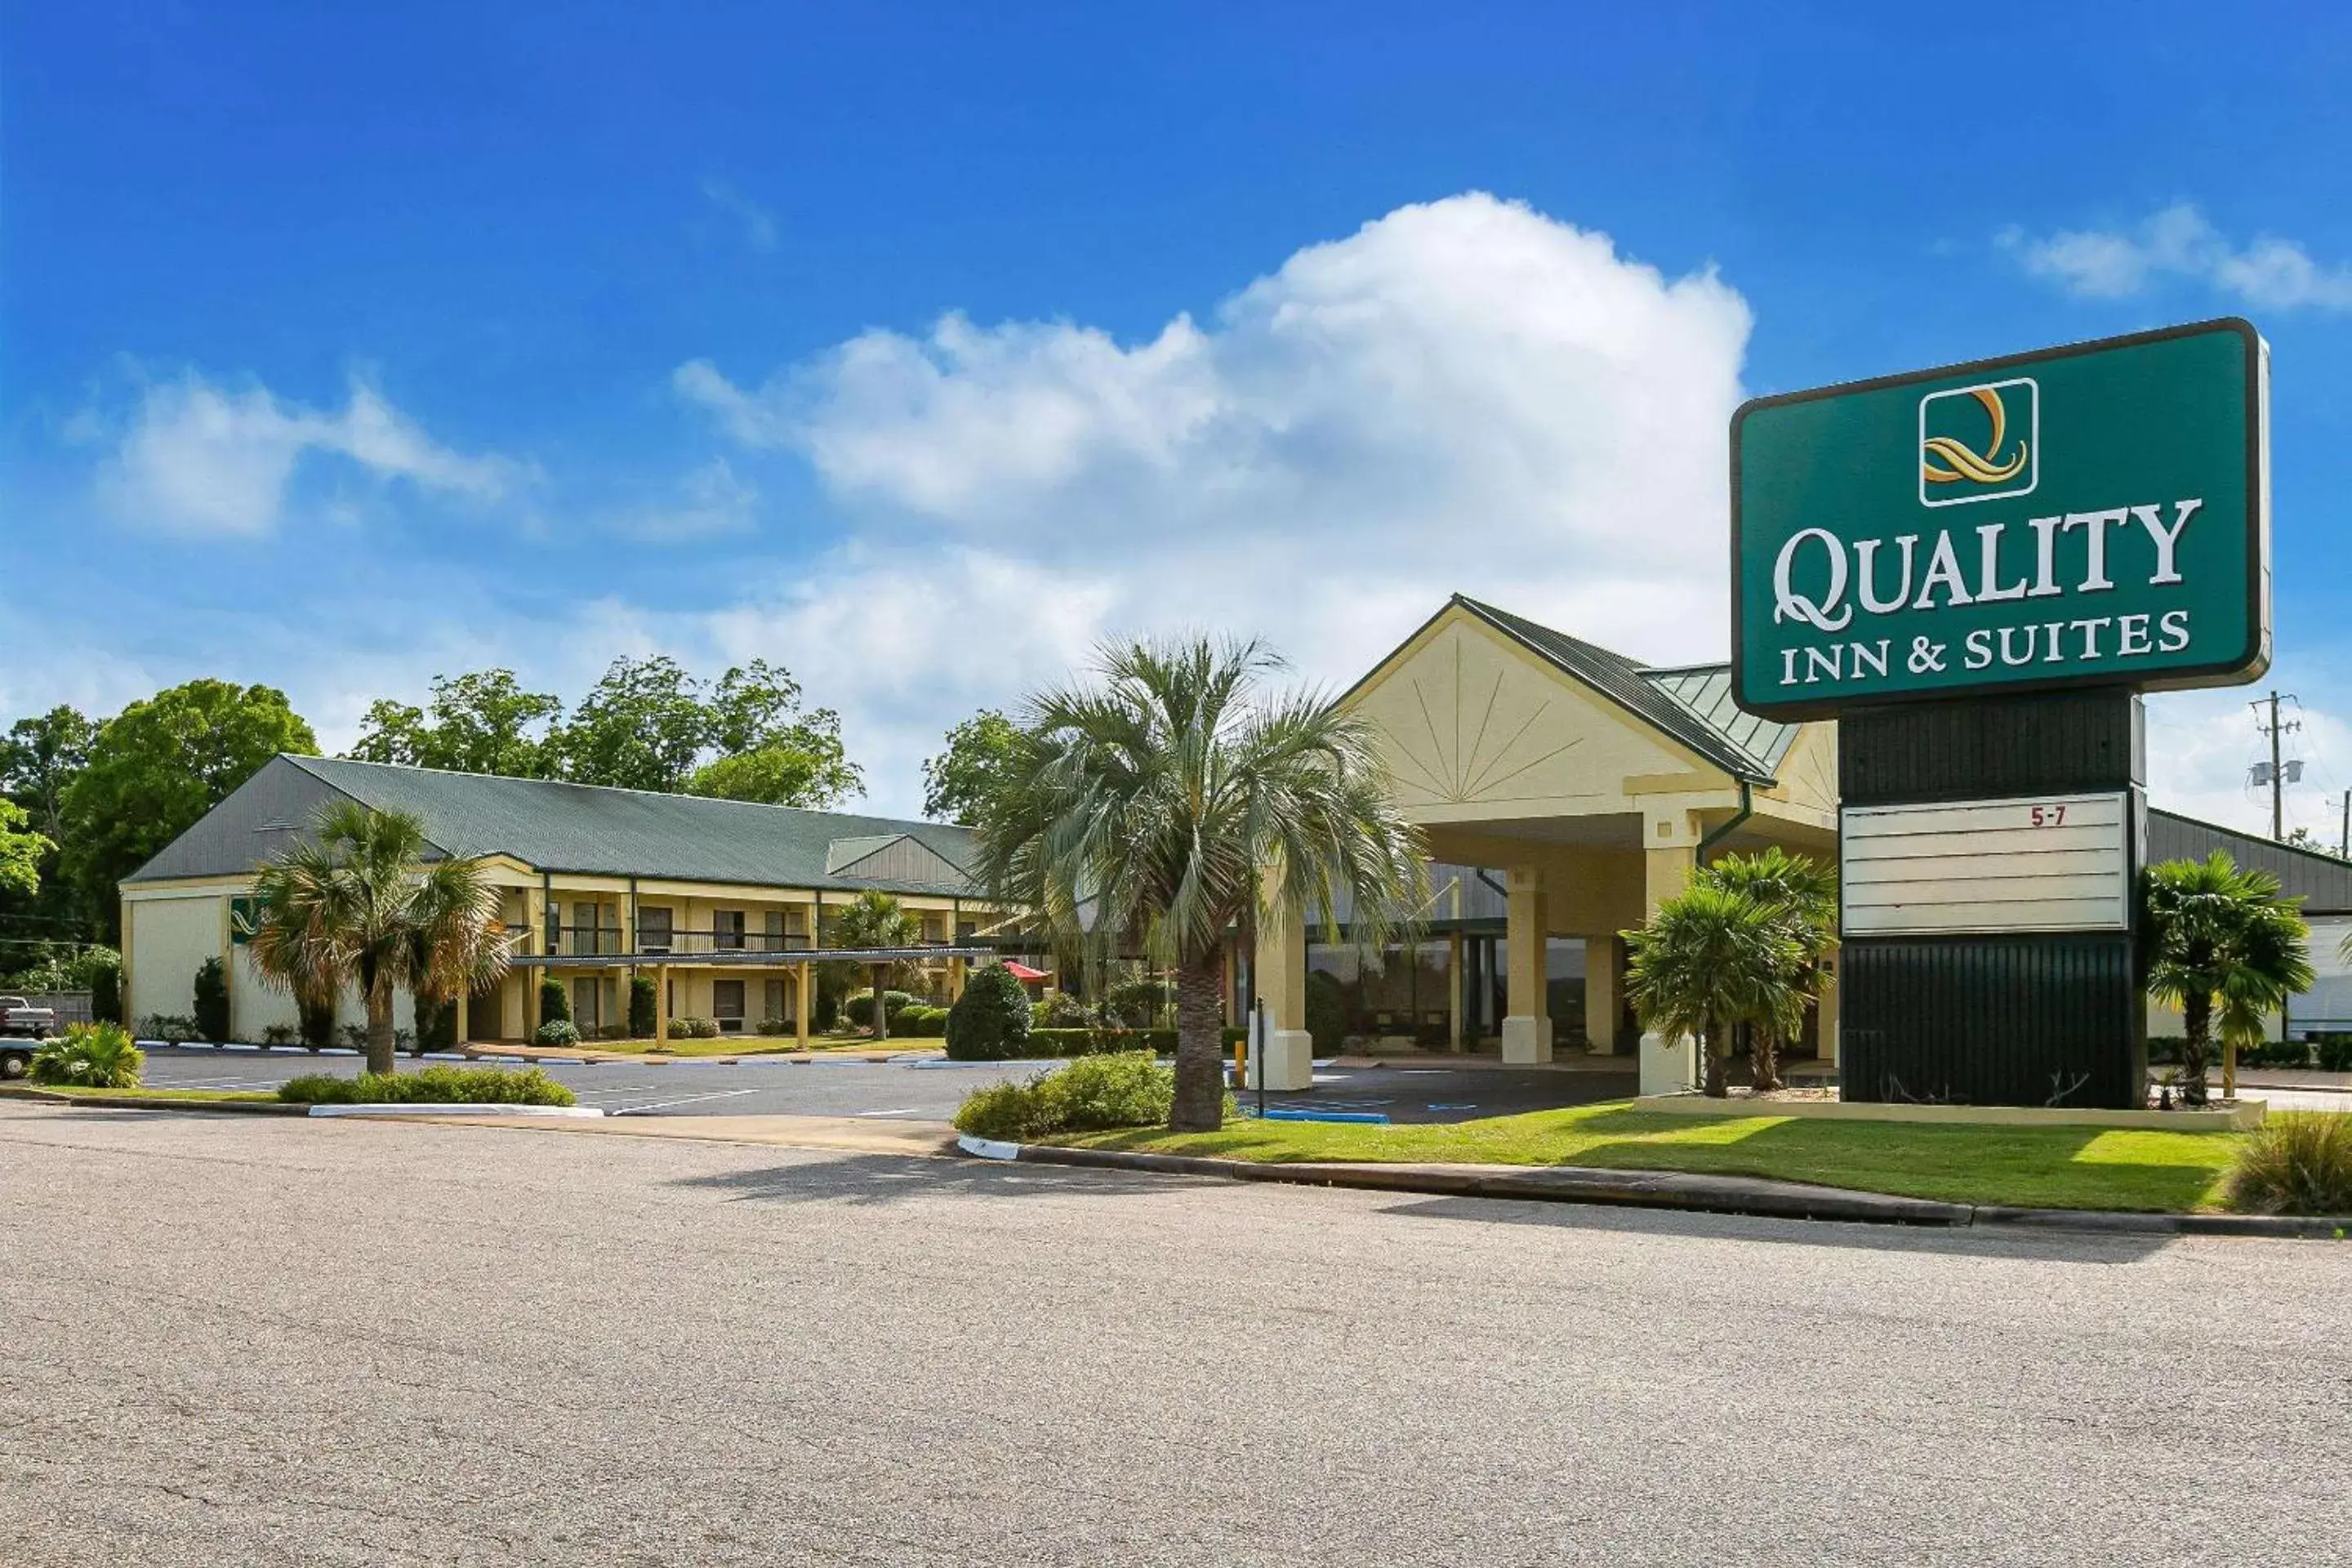 Property building in Quality Inn & Suites Eufaula